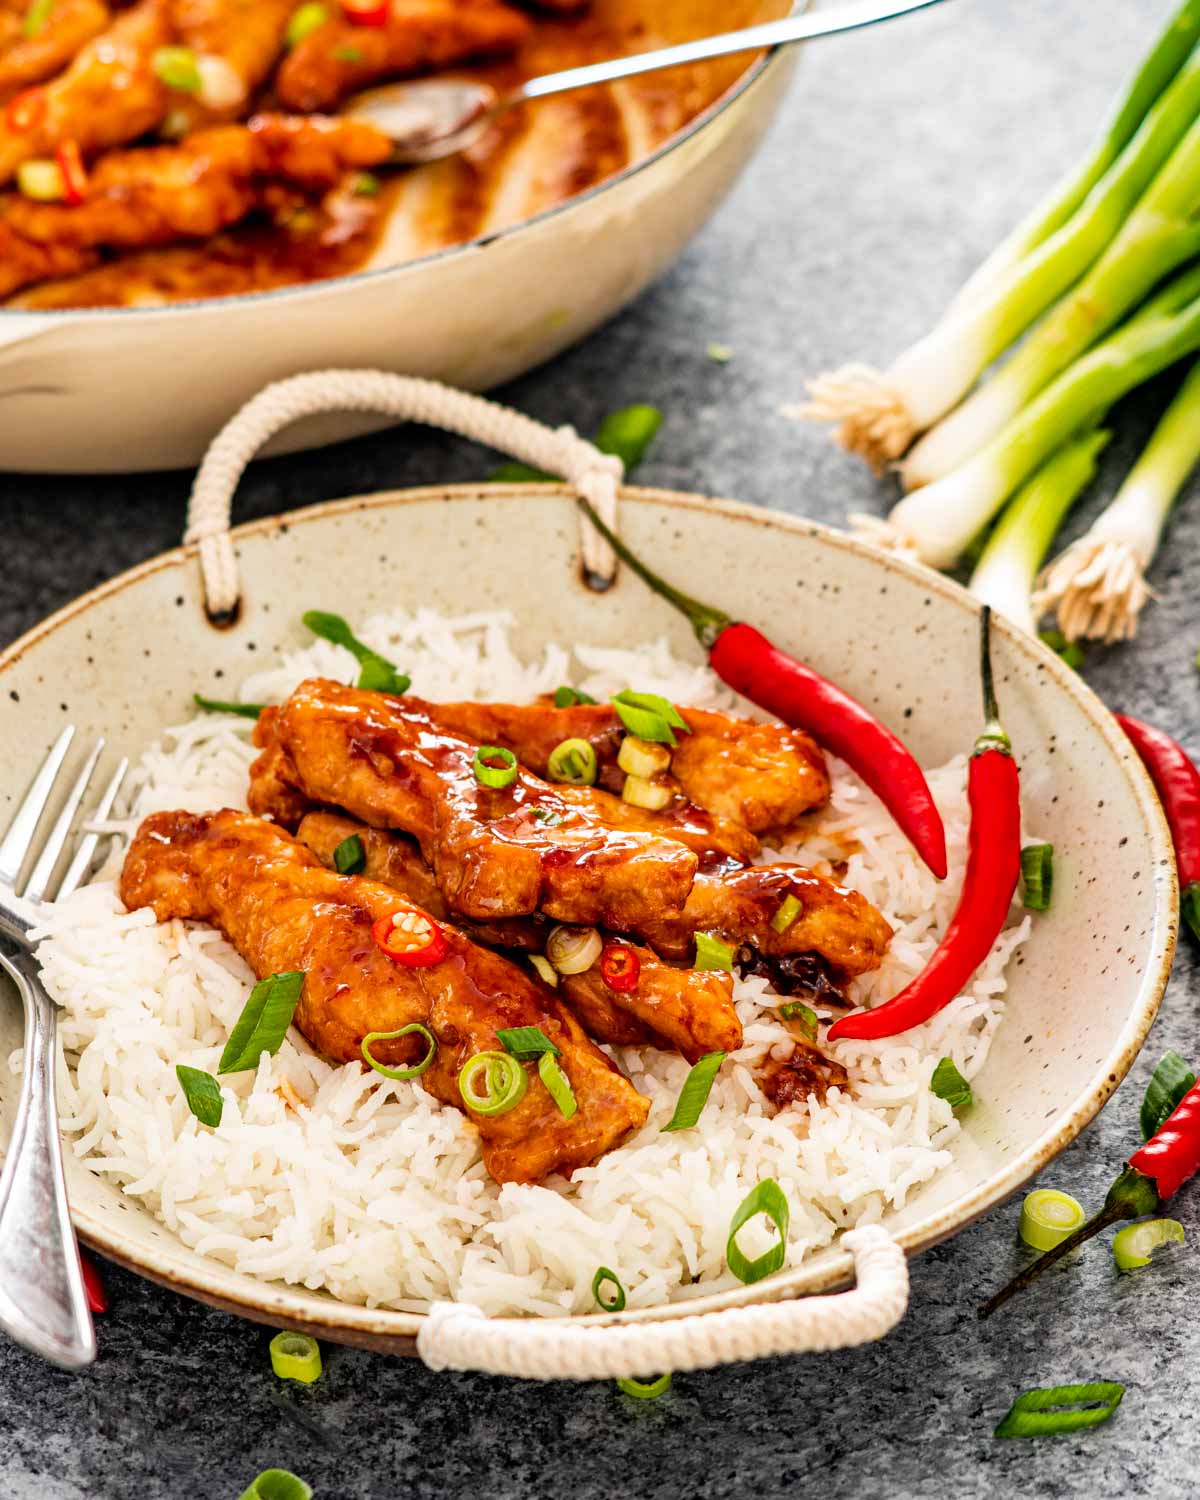 sweet chili chicken on a bed of rice garnished with green onions.